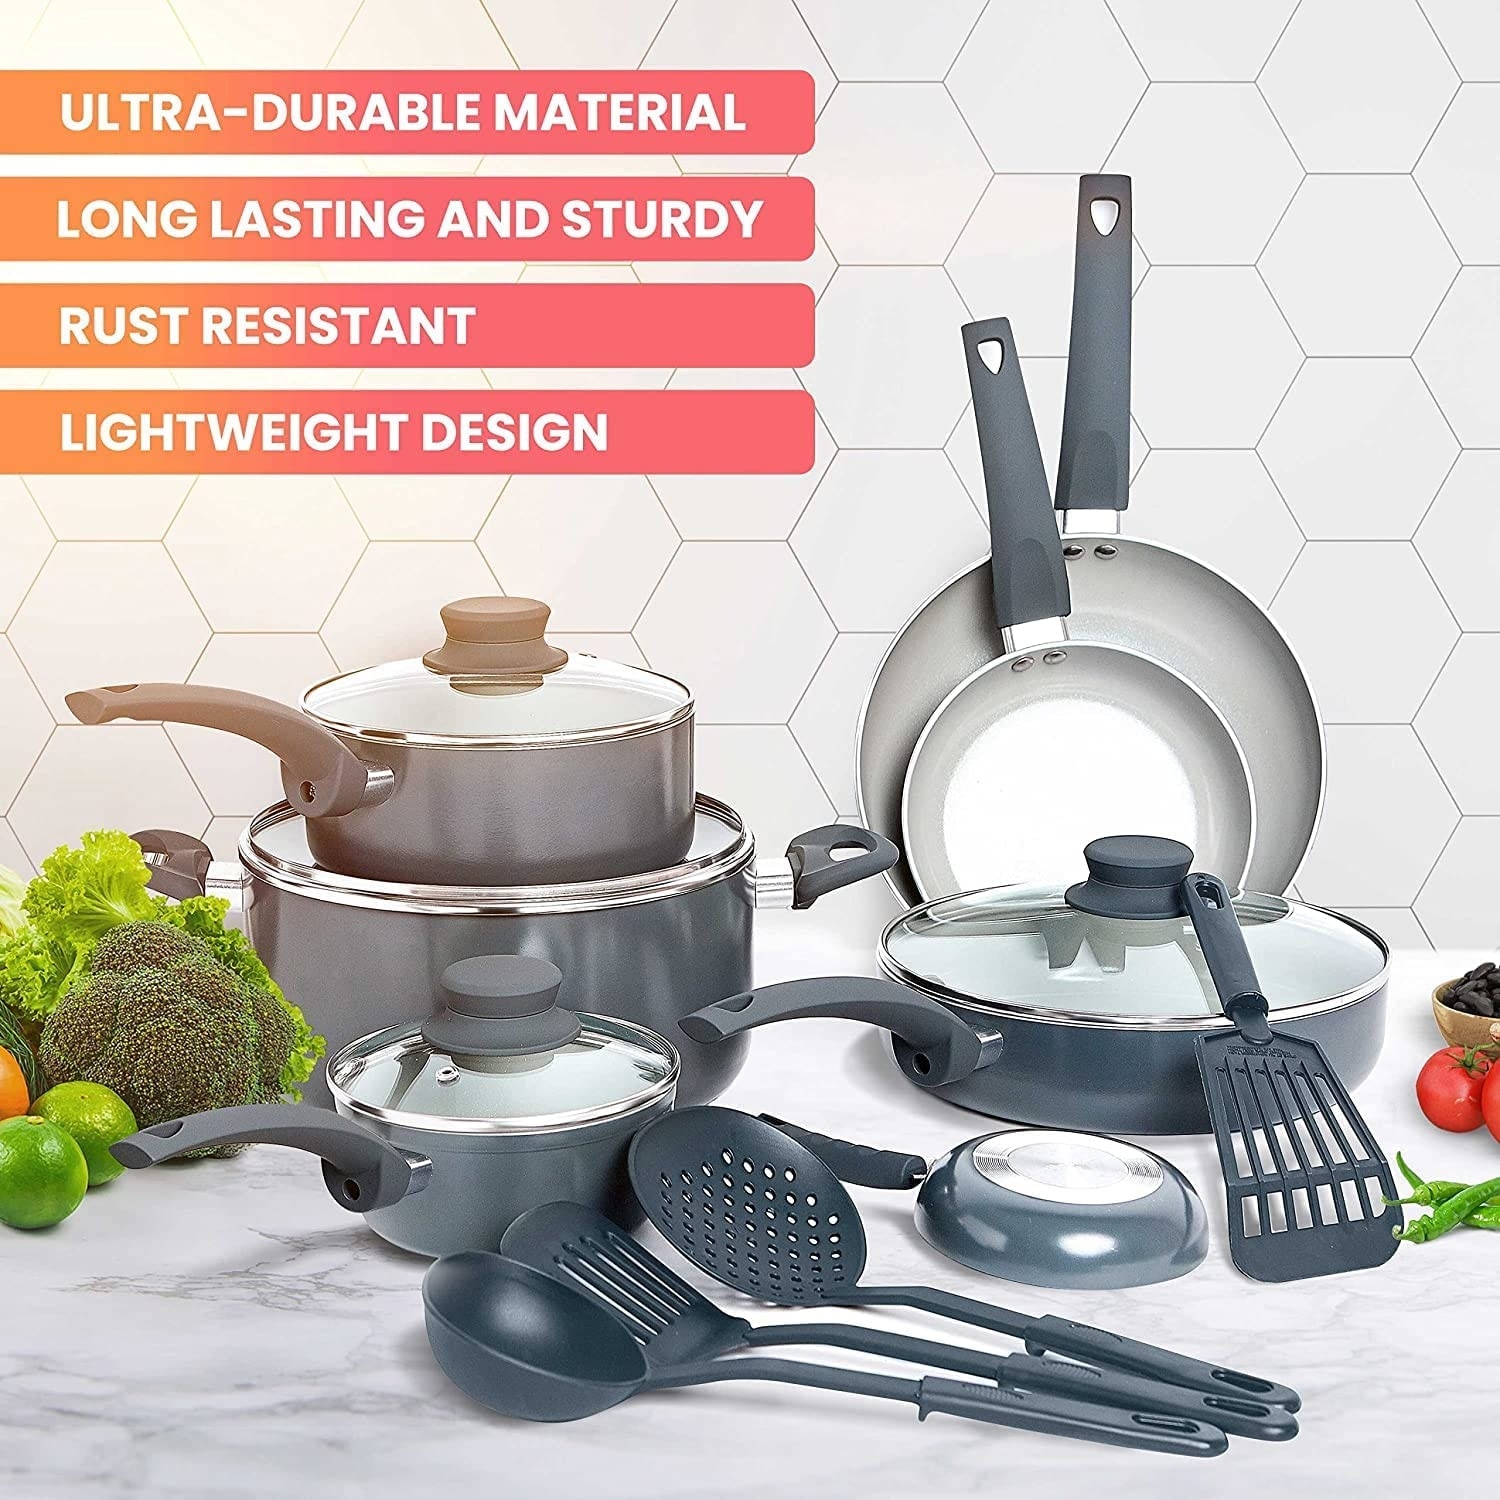 https://ak1.ostkcdn.com/images/products/is/images/direct/331067cec3d8e48f6d1d21e111b0fb43d3e7d1ba/Pots-and-Pans-Set-Nonstick-16-Piece-Healthy-Stone-Kitchen-Cookware-Sets.jpg